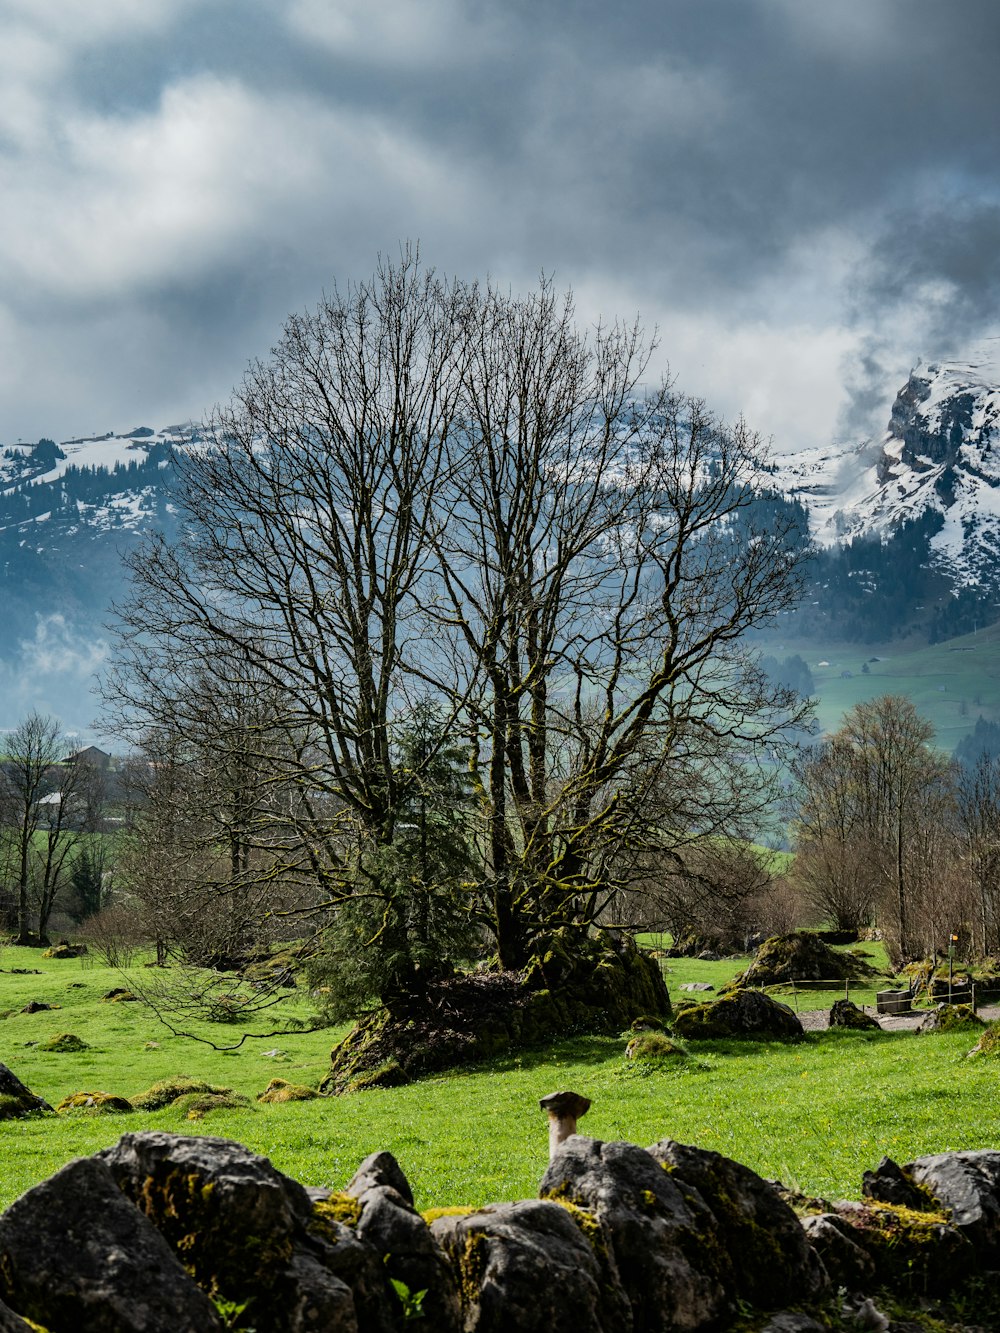 a lone sheep in a field with a mountain in the background